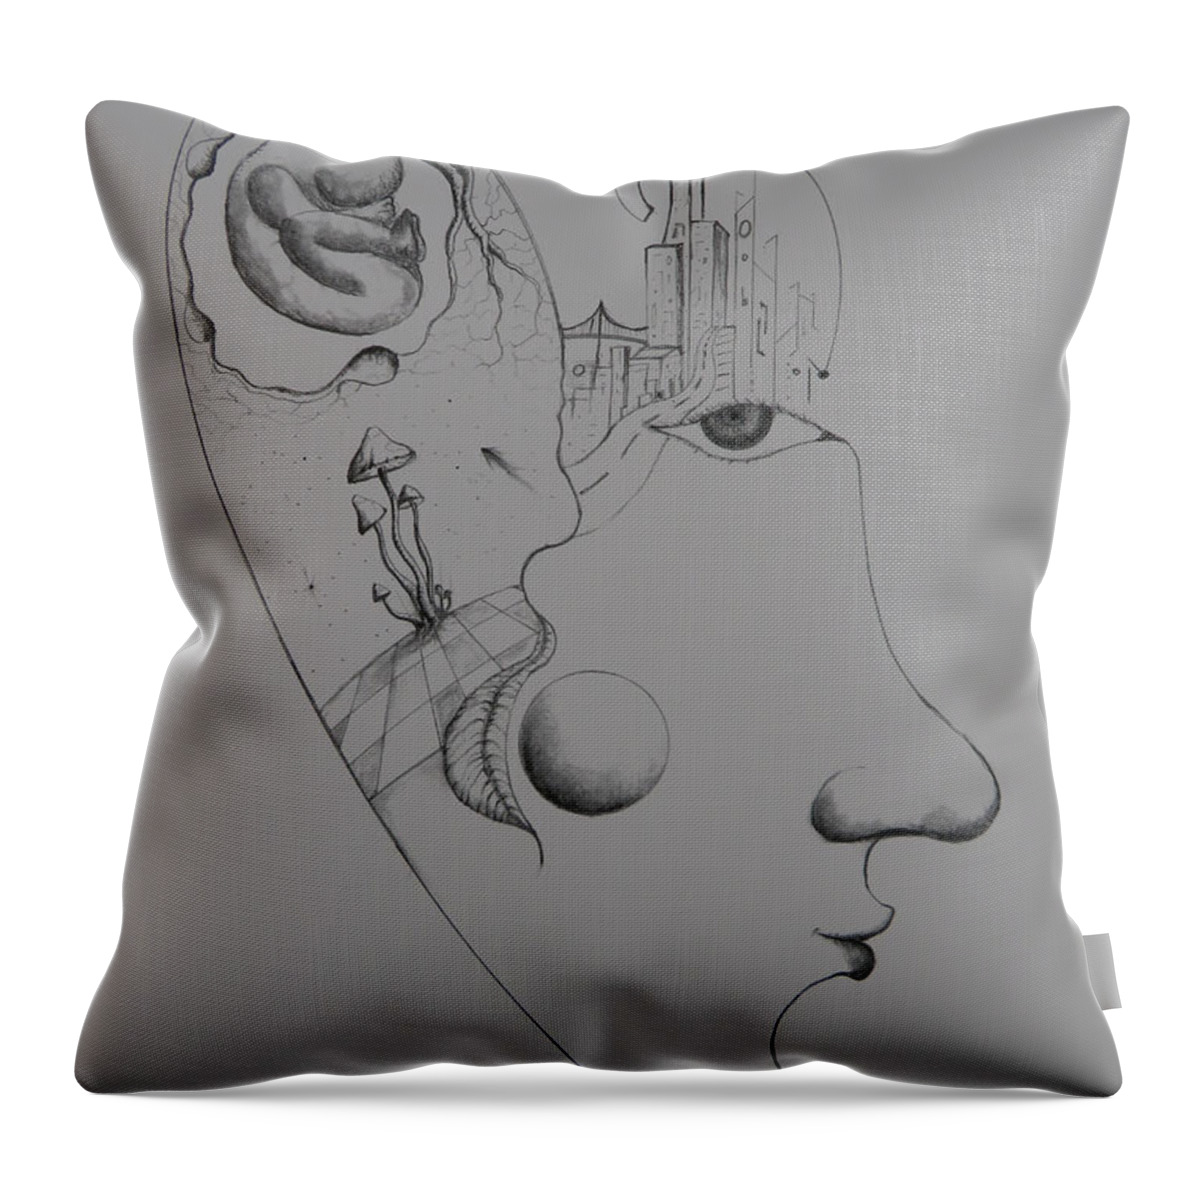 Surreal Throw Pillow featuring the drawing Evolution by Raymond Fernandez